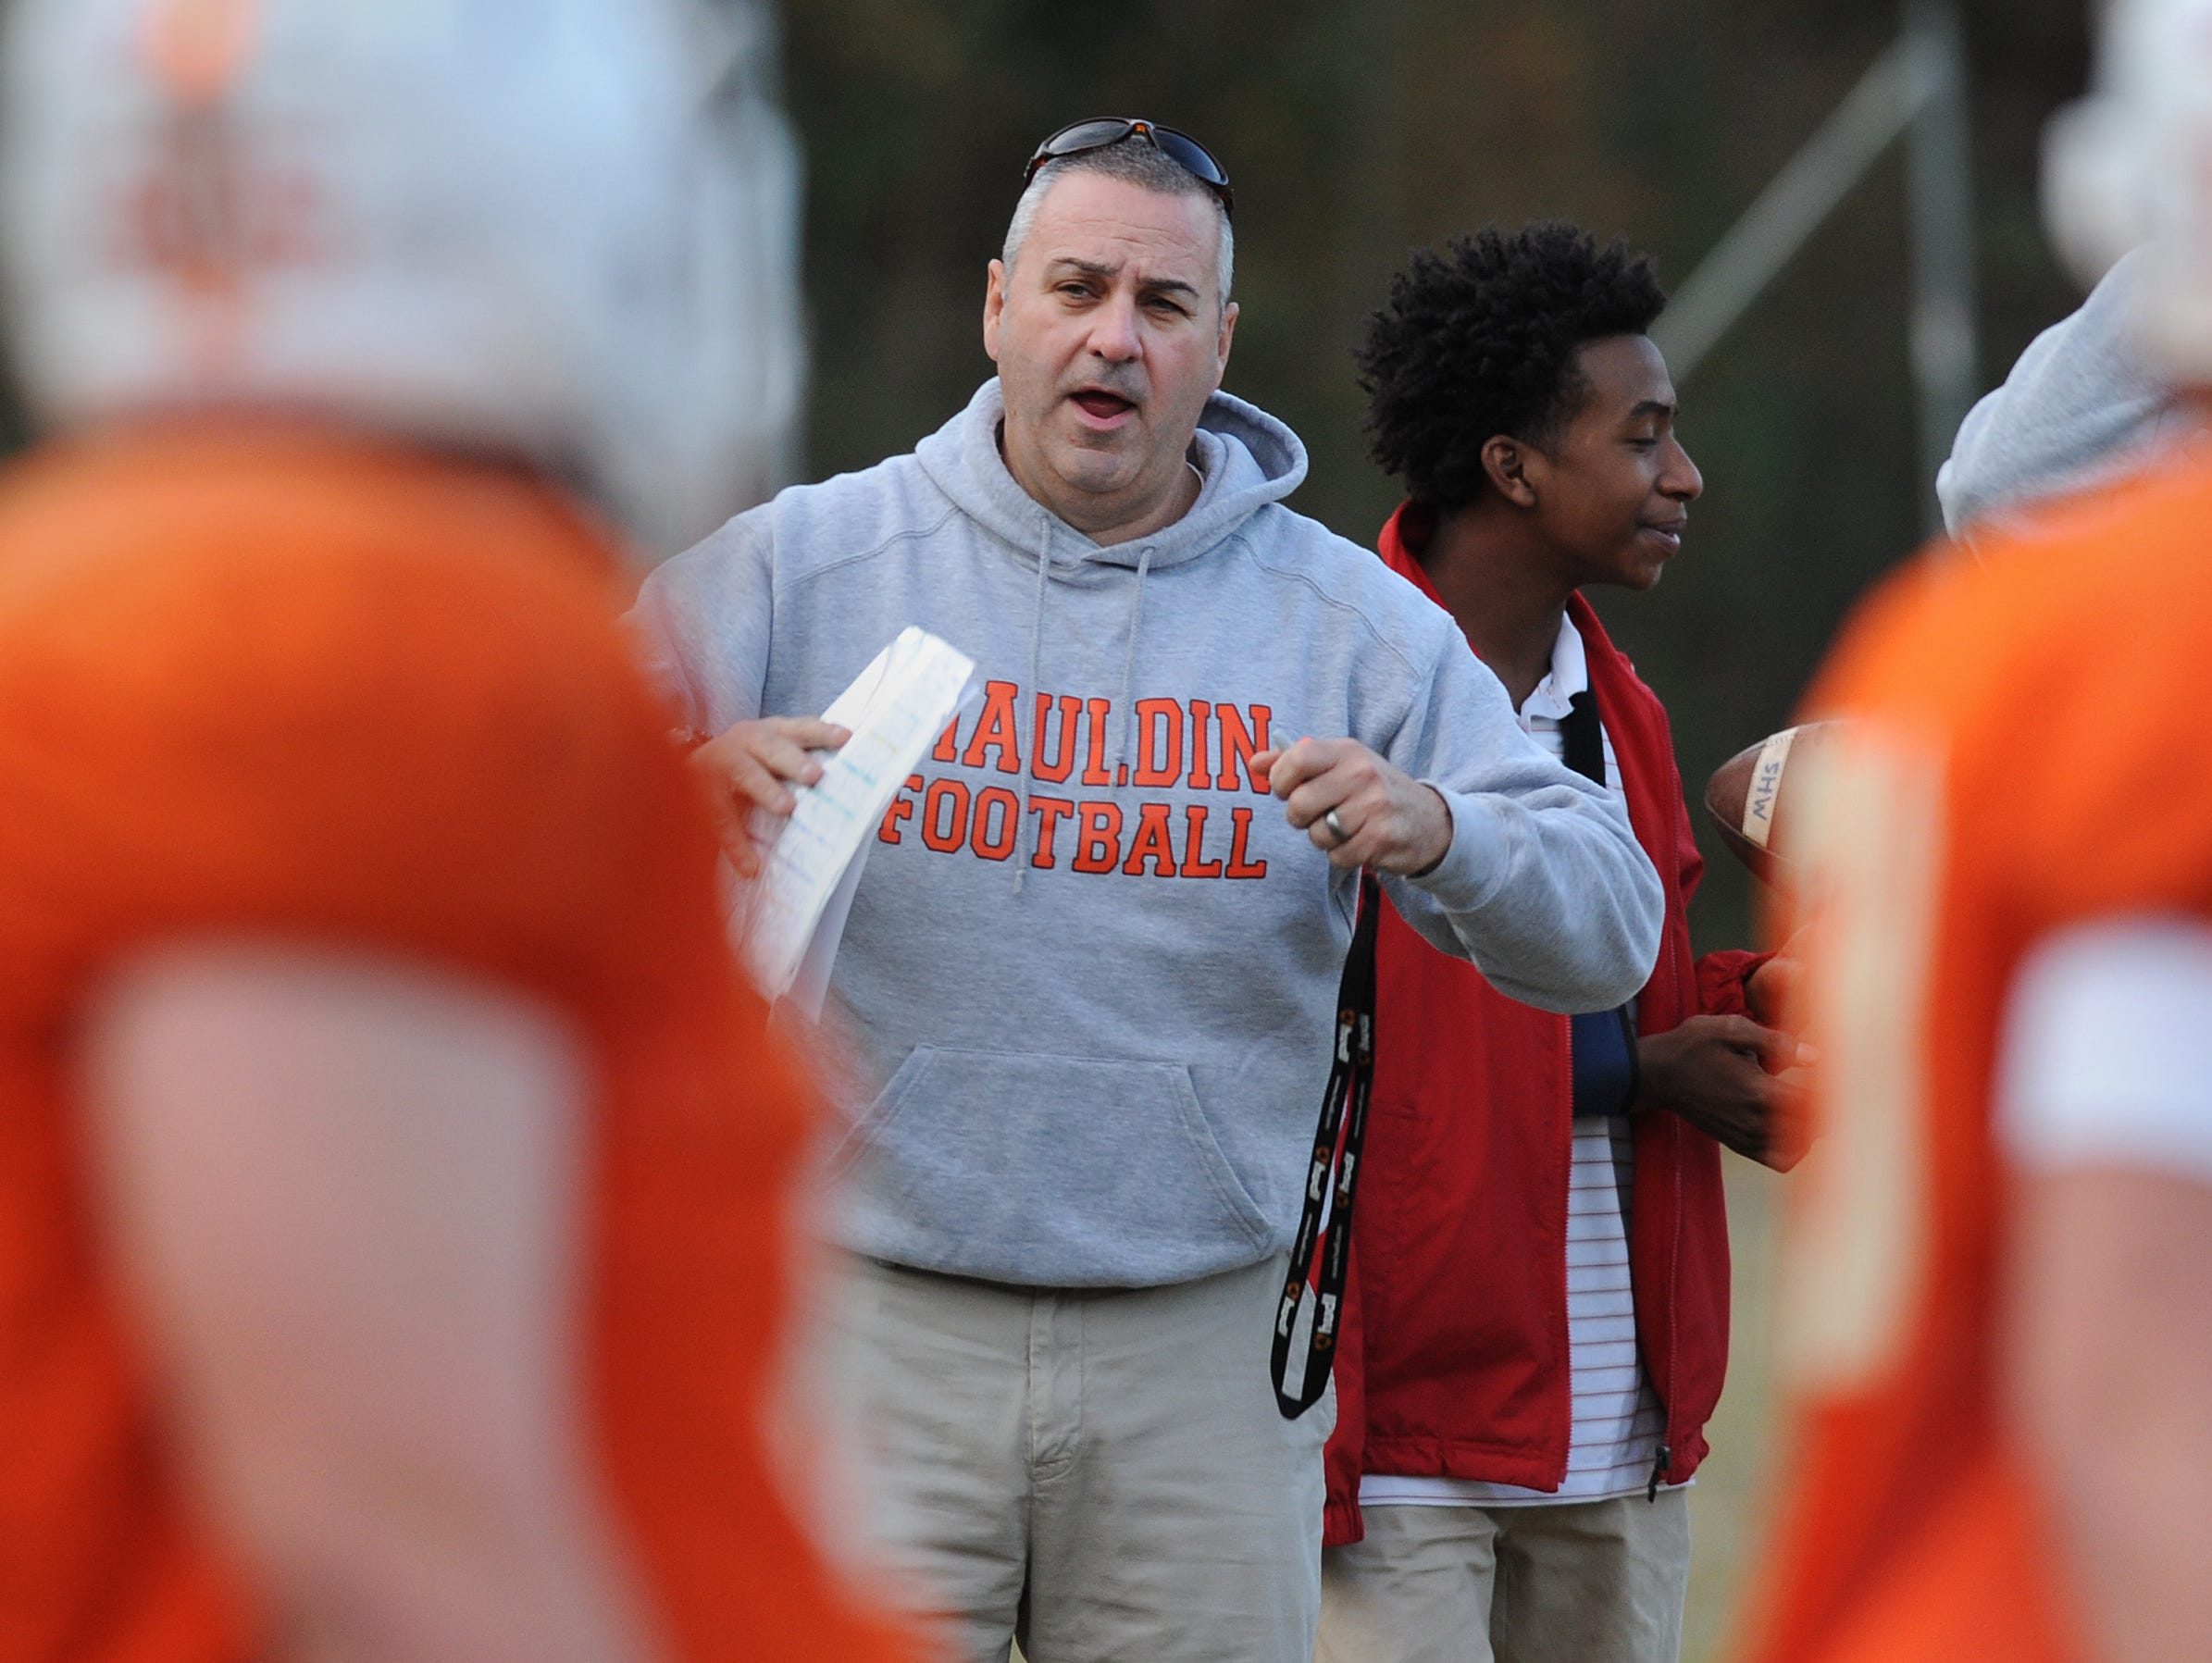 Mauldin head coach Lee Taylor calls plays to the offense during the teams practice Monday, November 16, 2015. Mauldin will play Hillcrest in the 1st round of the AAAA playoffs Friday at Hillcrest.